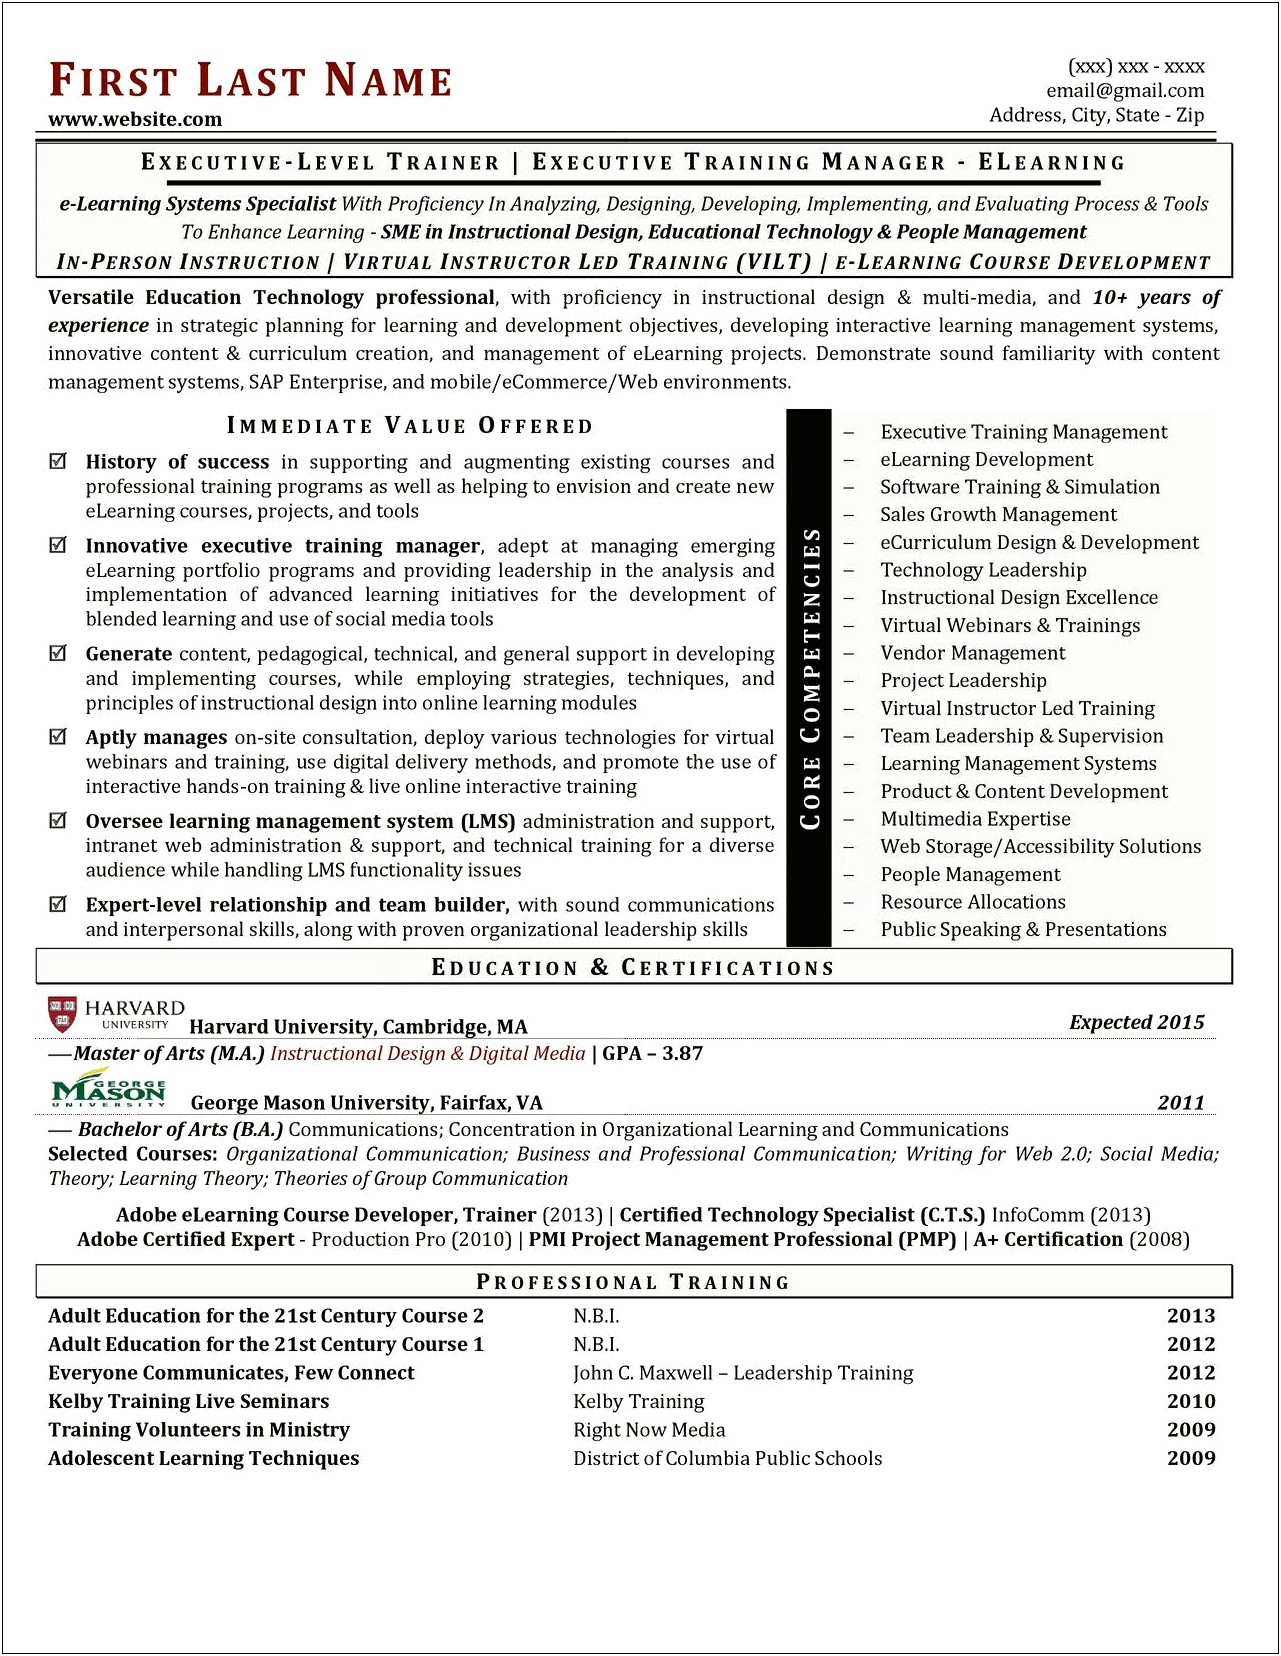 Examples Of Instructional Design Resumes